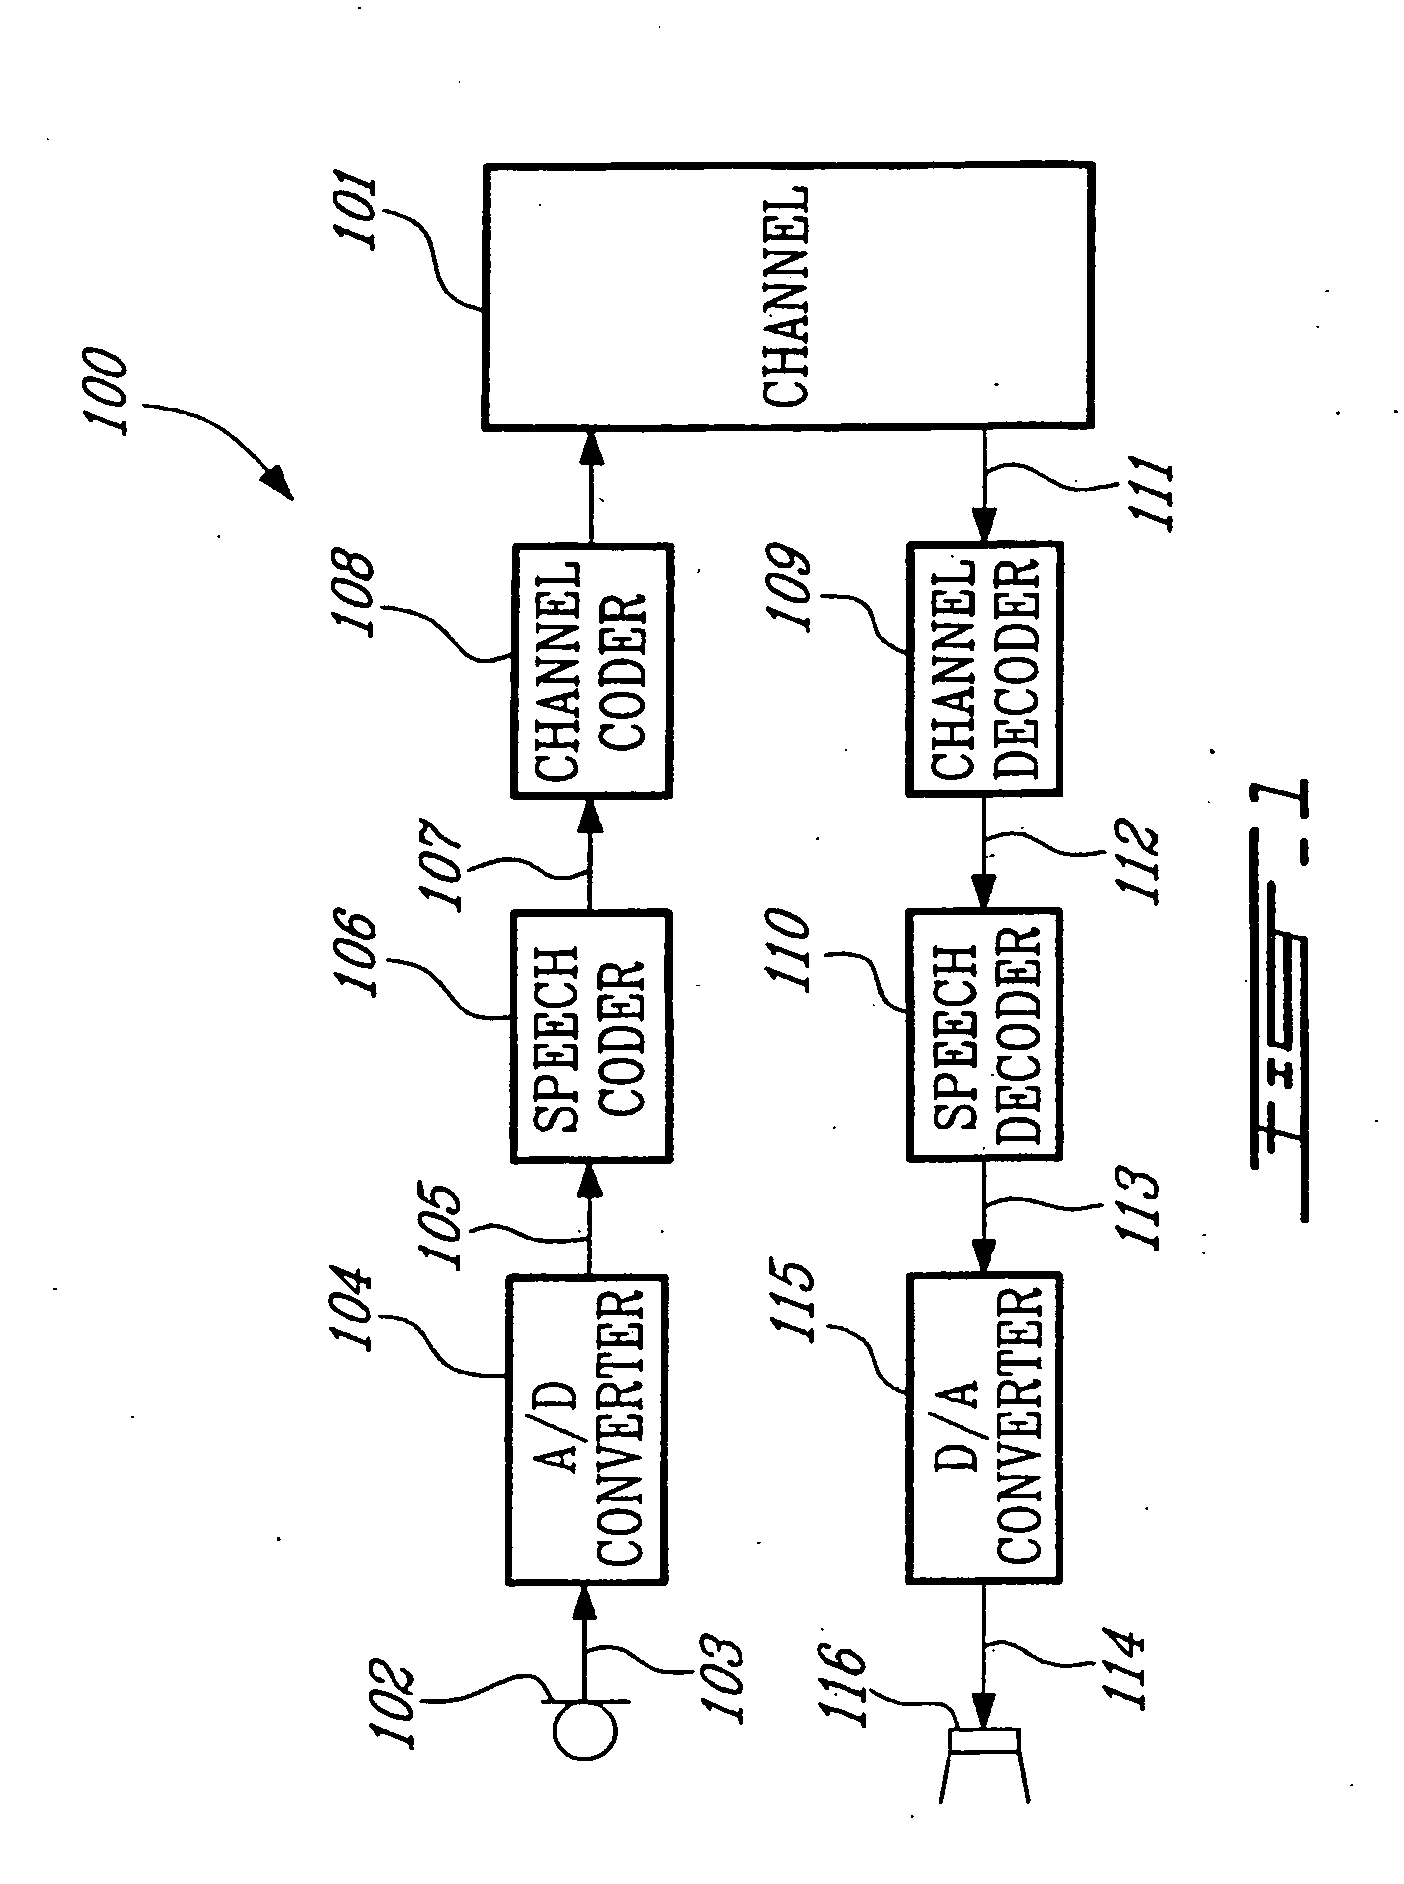 Method and device for efficient in-band dim-and-burst signaling and half-rate max operation in variable bit-rate wideband speech coding for cdma wireless systems